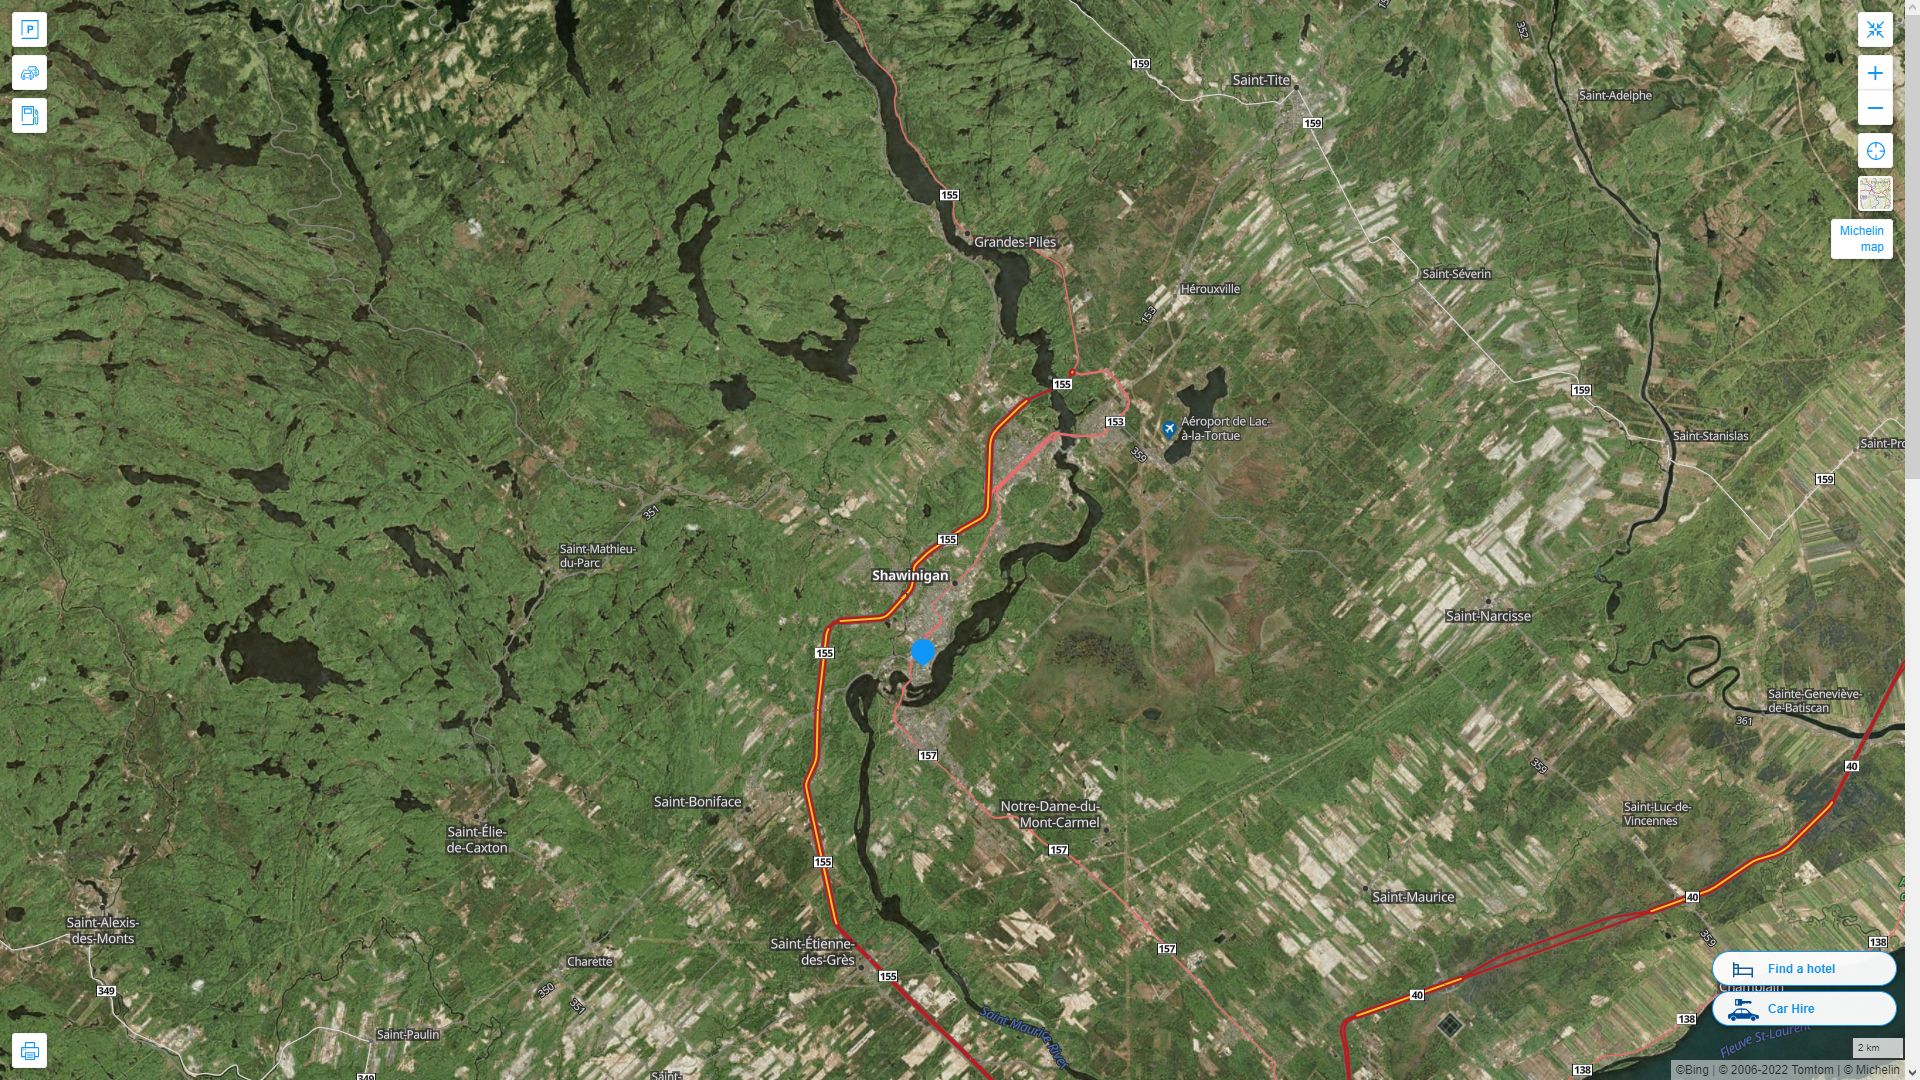 Shawinigan Highway and Road Map with Satellite View